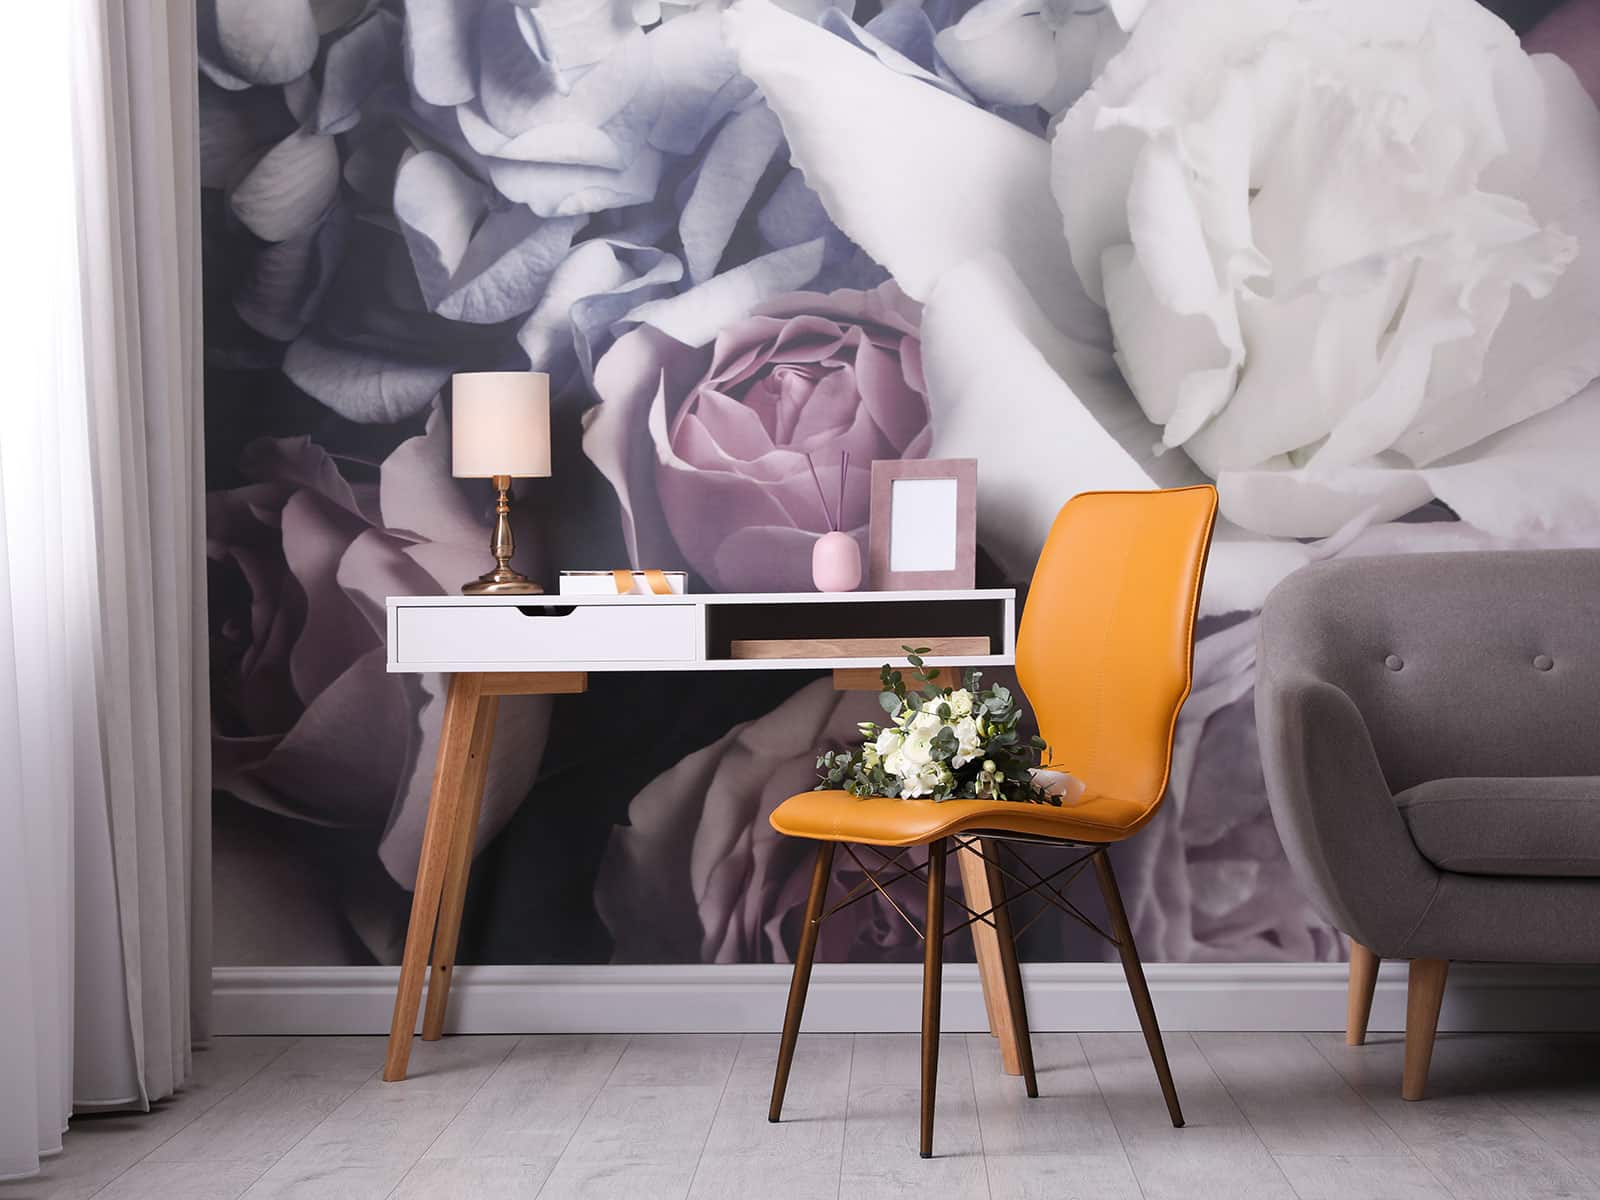 Wallpaper Printing Smooth | Trade prices from £ sqm